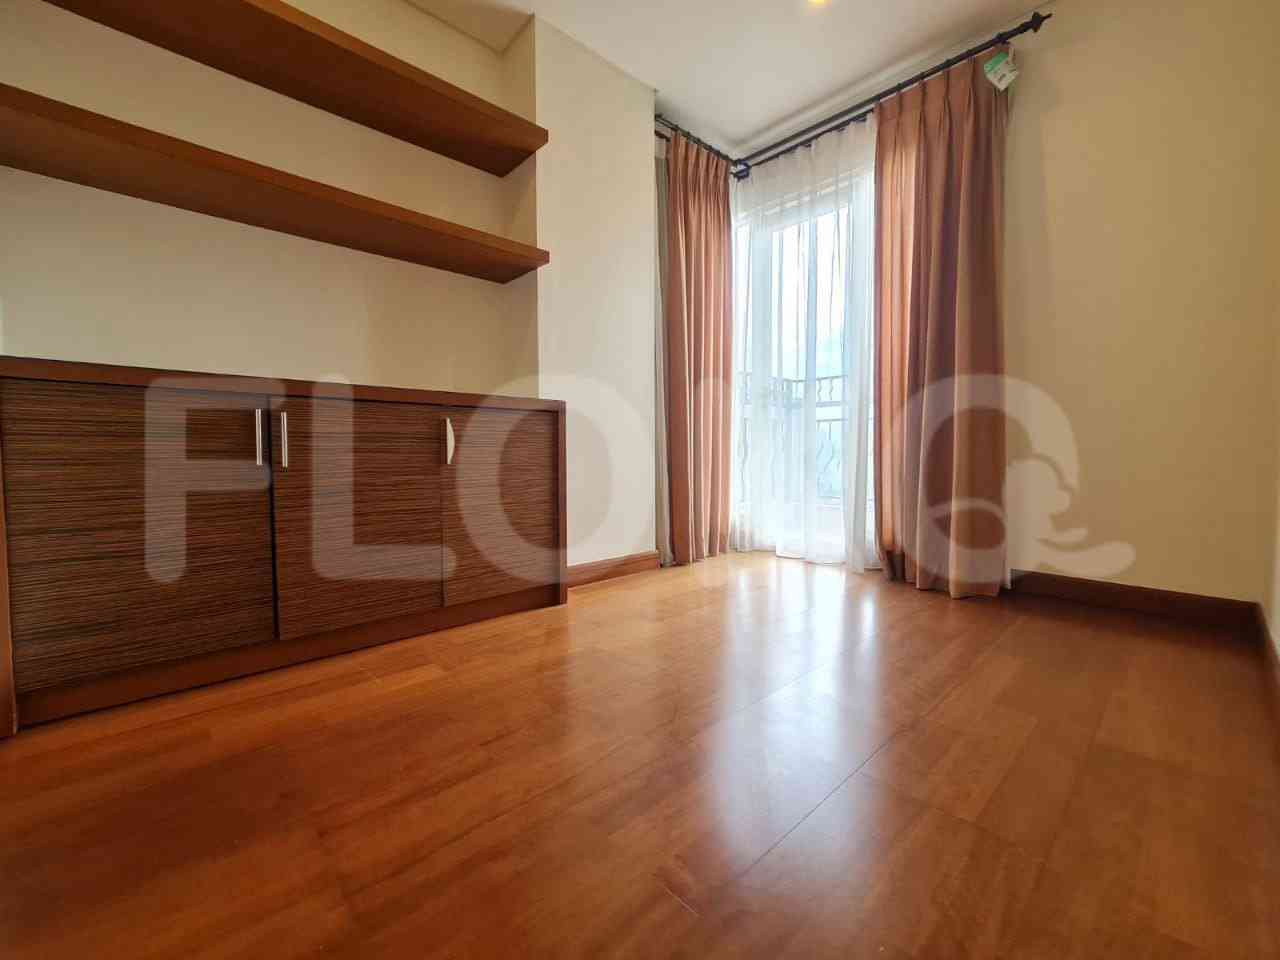 3 Bedroom on 20th Floor for Rent in Permata Hijau Residence - fpe694 4